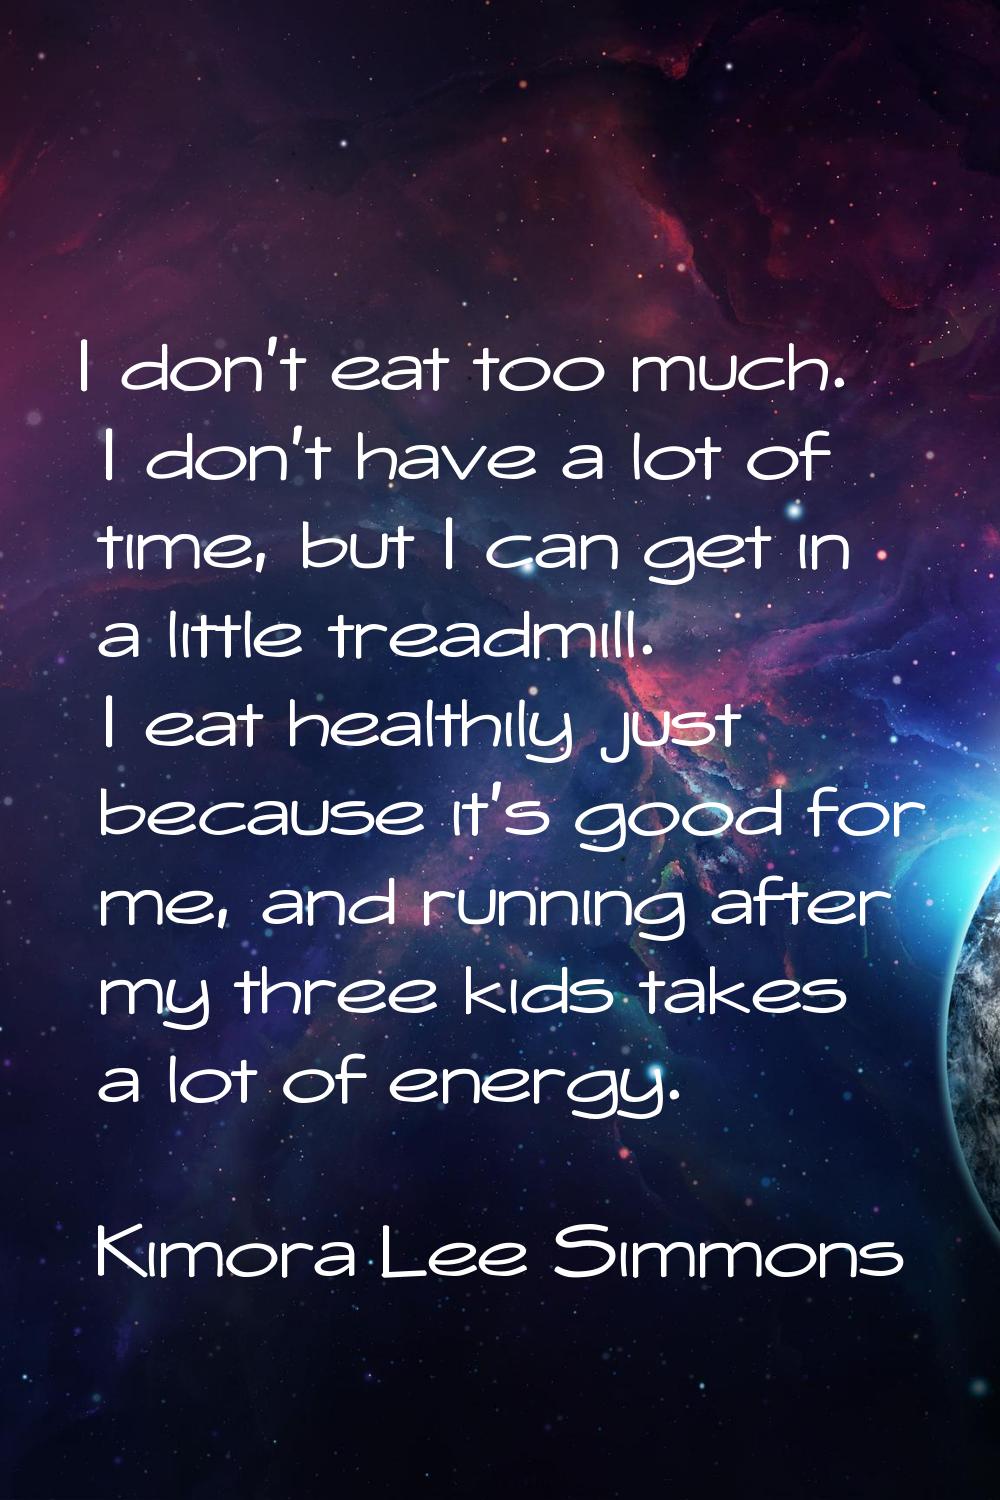 I don't eat too much. I don't have a lot of time, but I can get in a little treadmill. I eat health